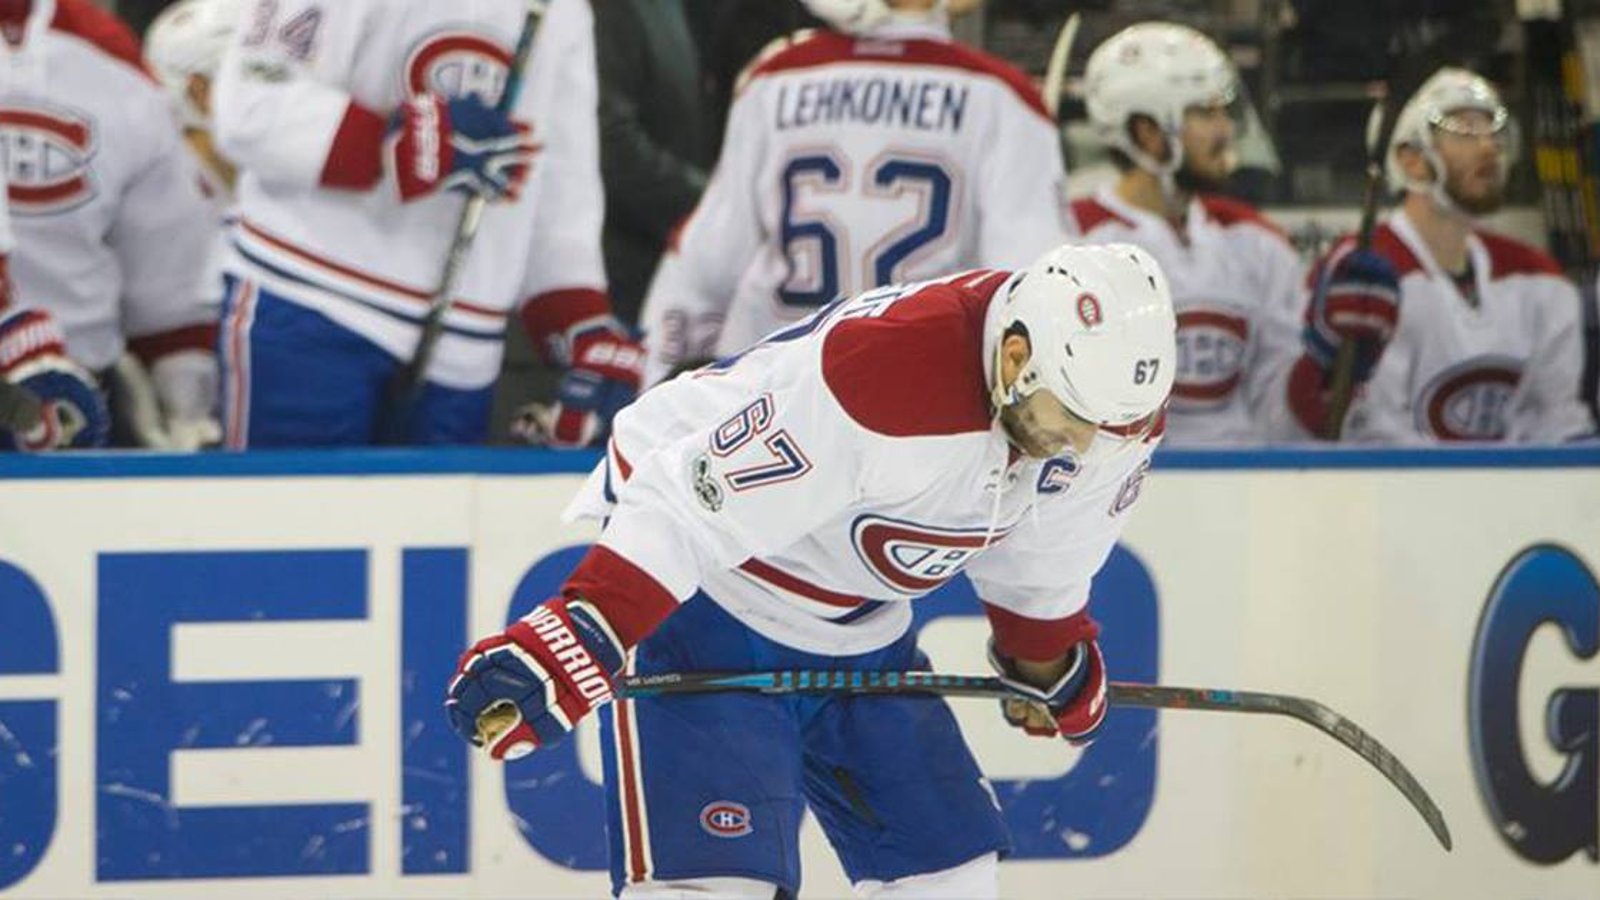 Report: Habs make lineup changes after awful loss